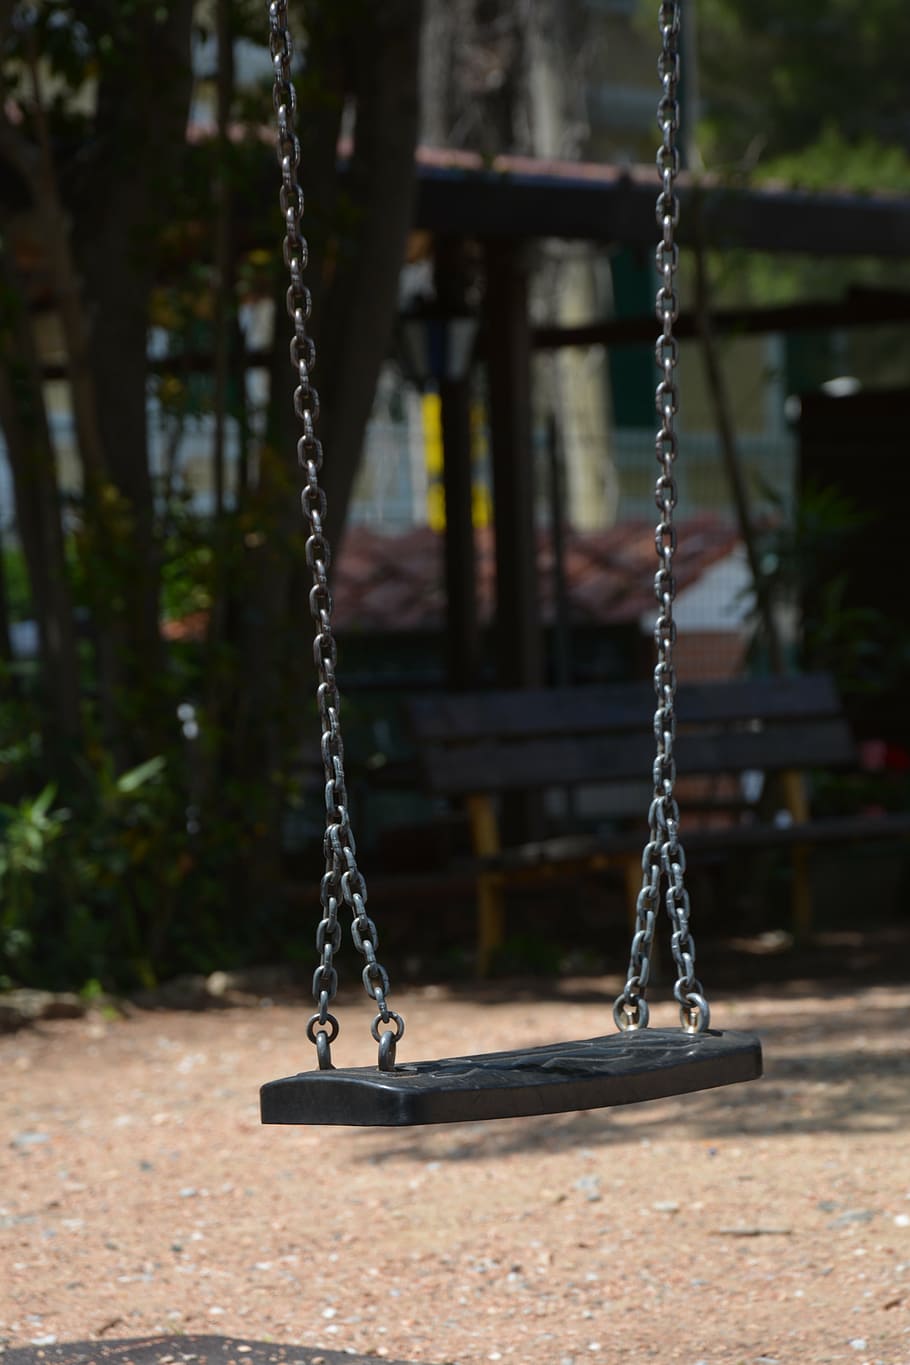 swing, playground, children's games, chain, metal, focus on foreground, hanging, day, outdoor play equipment, outdoors